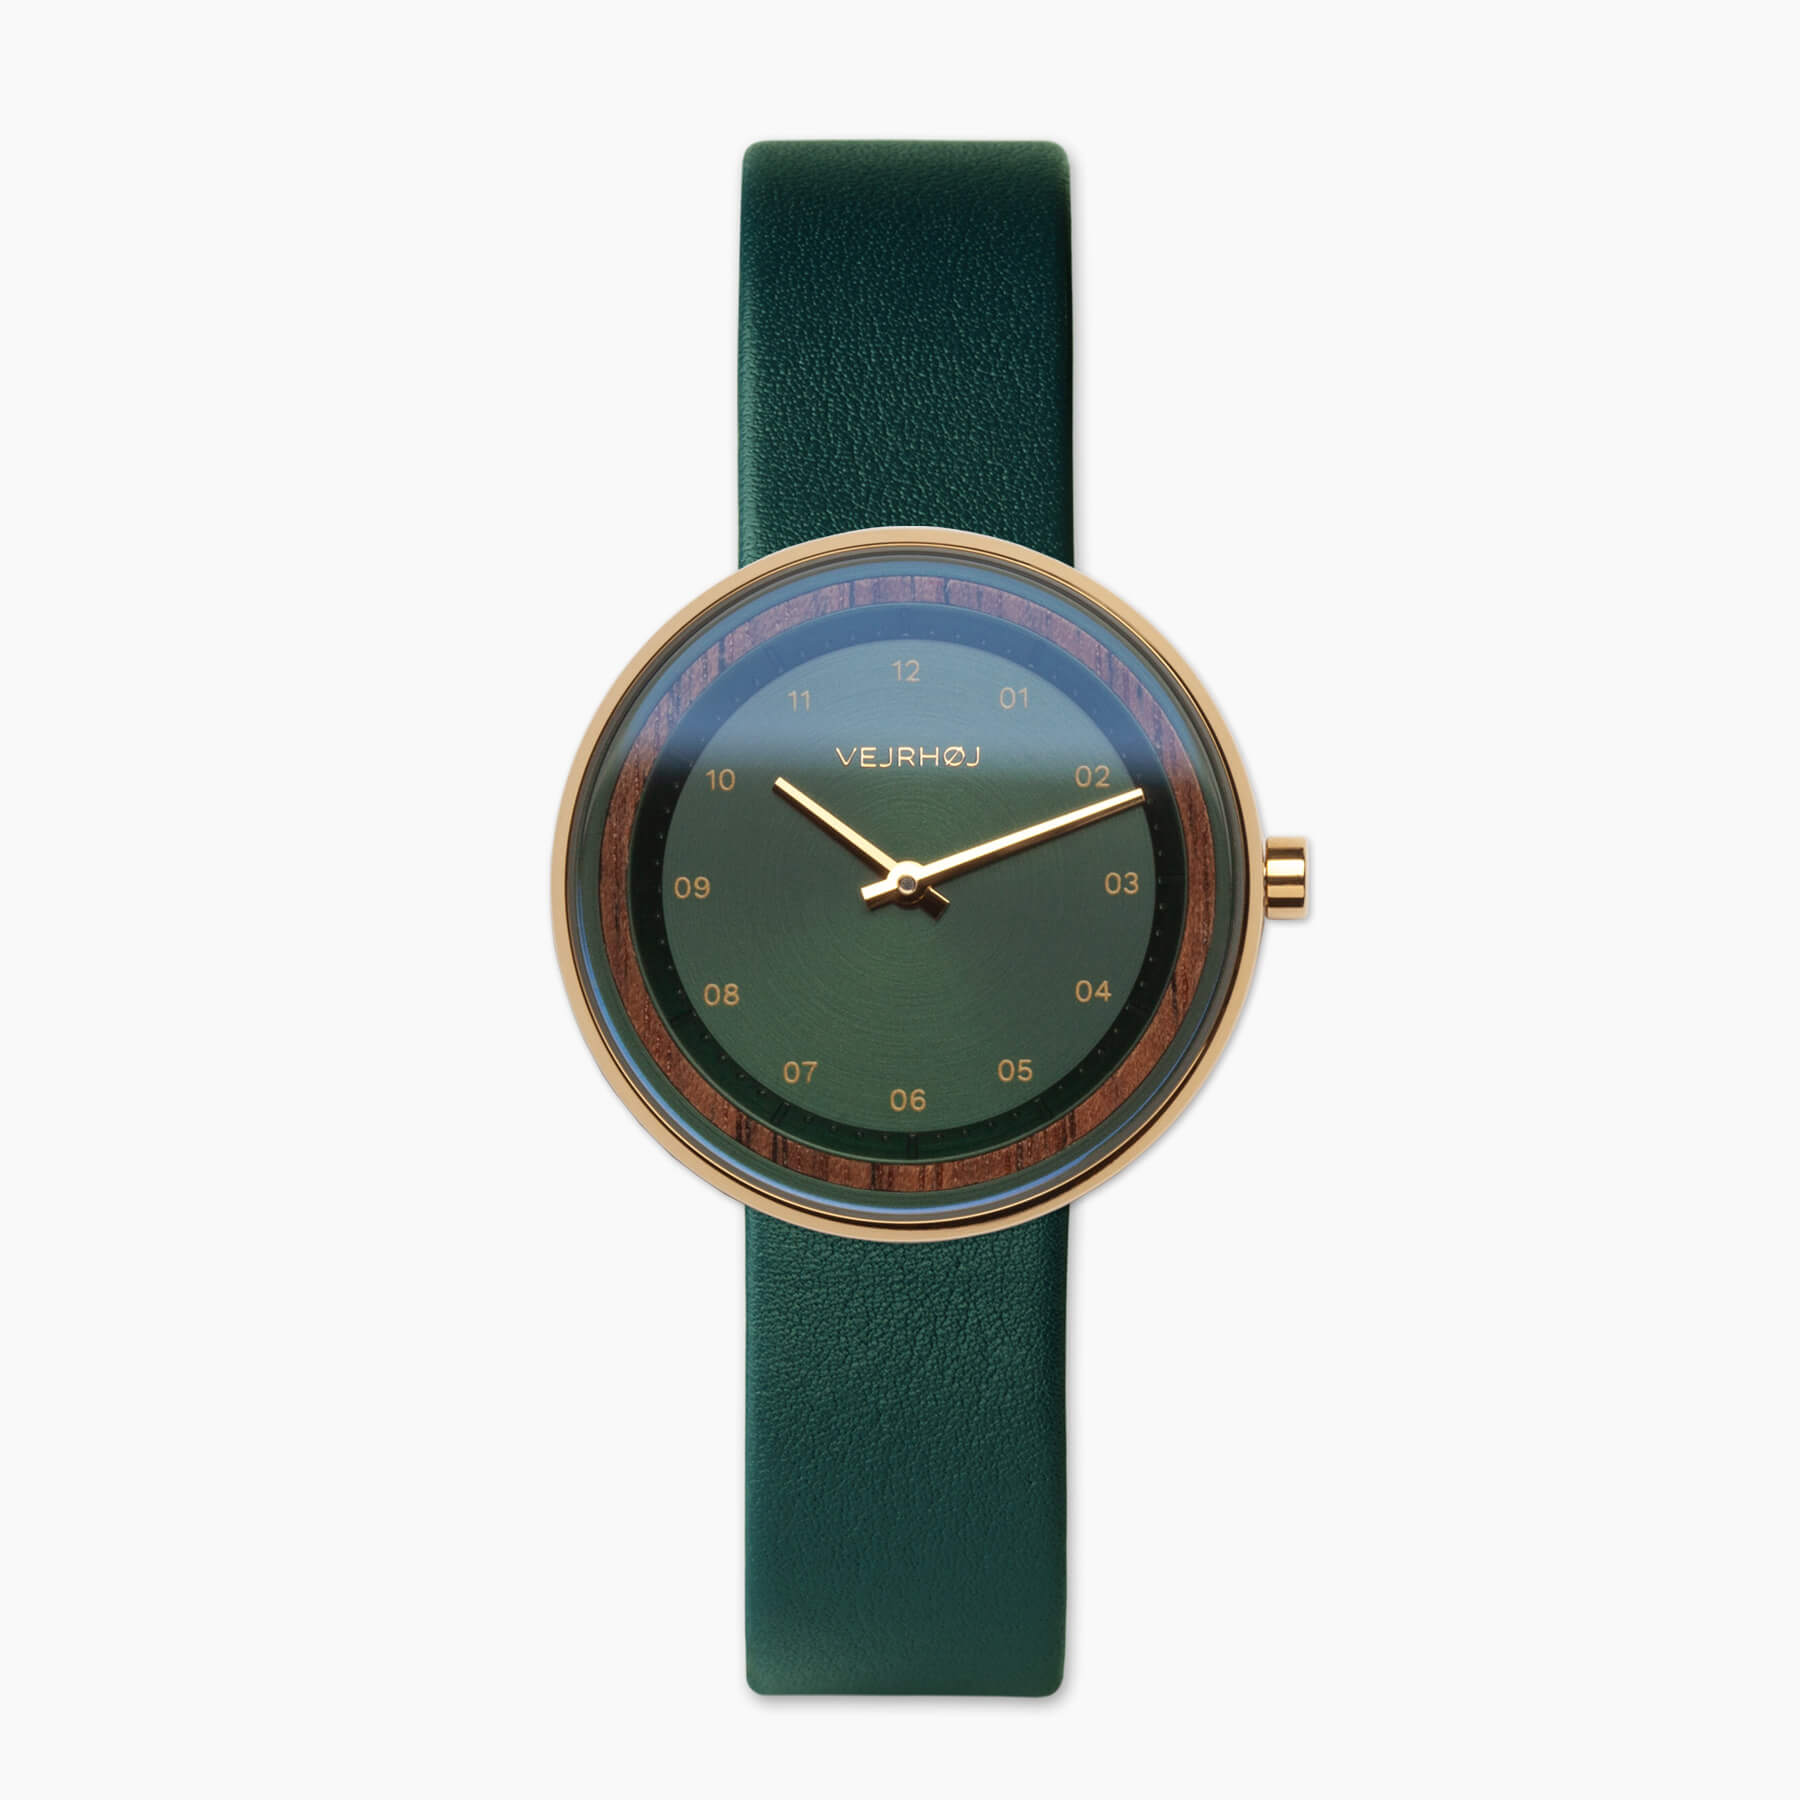 Green ladies' watch with golden case and golden hour markings.